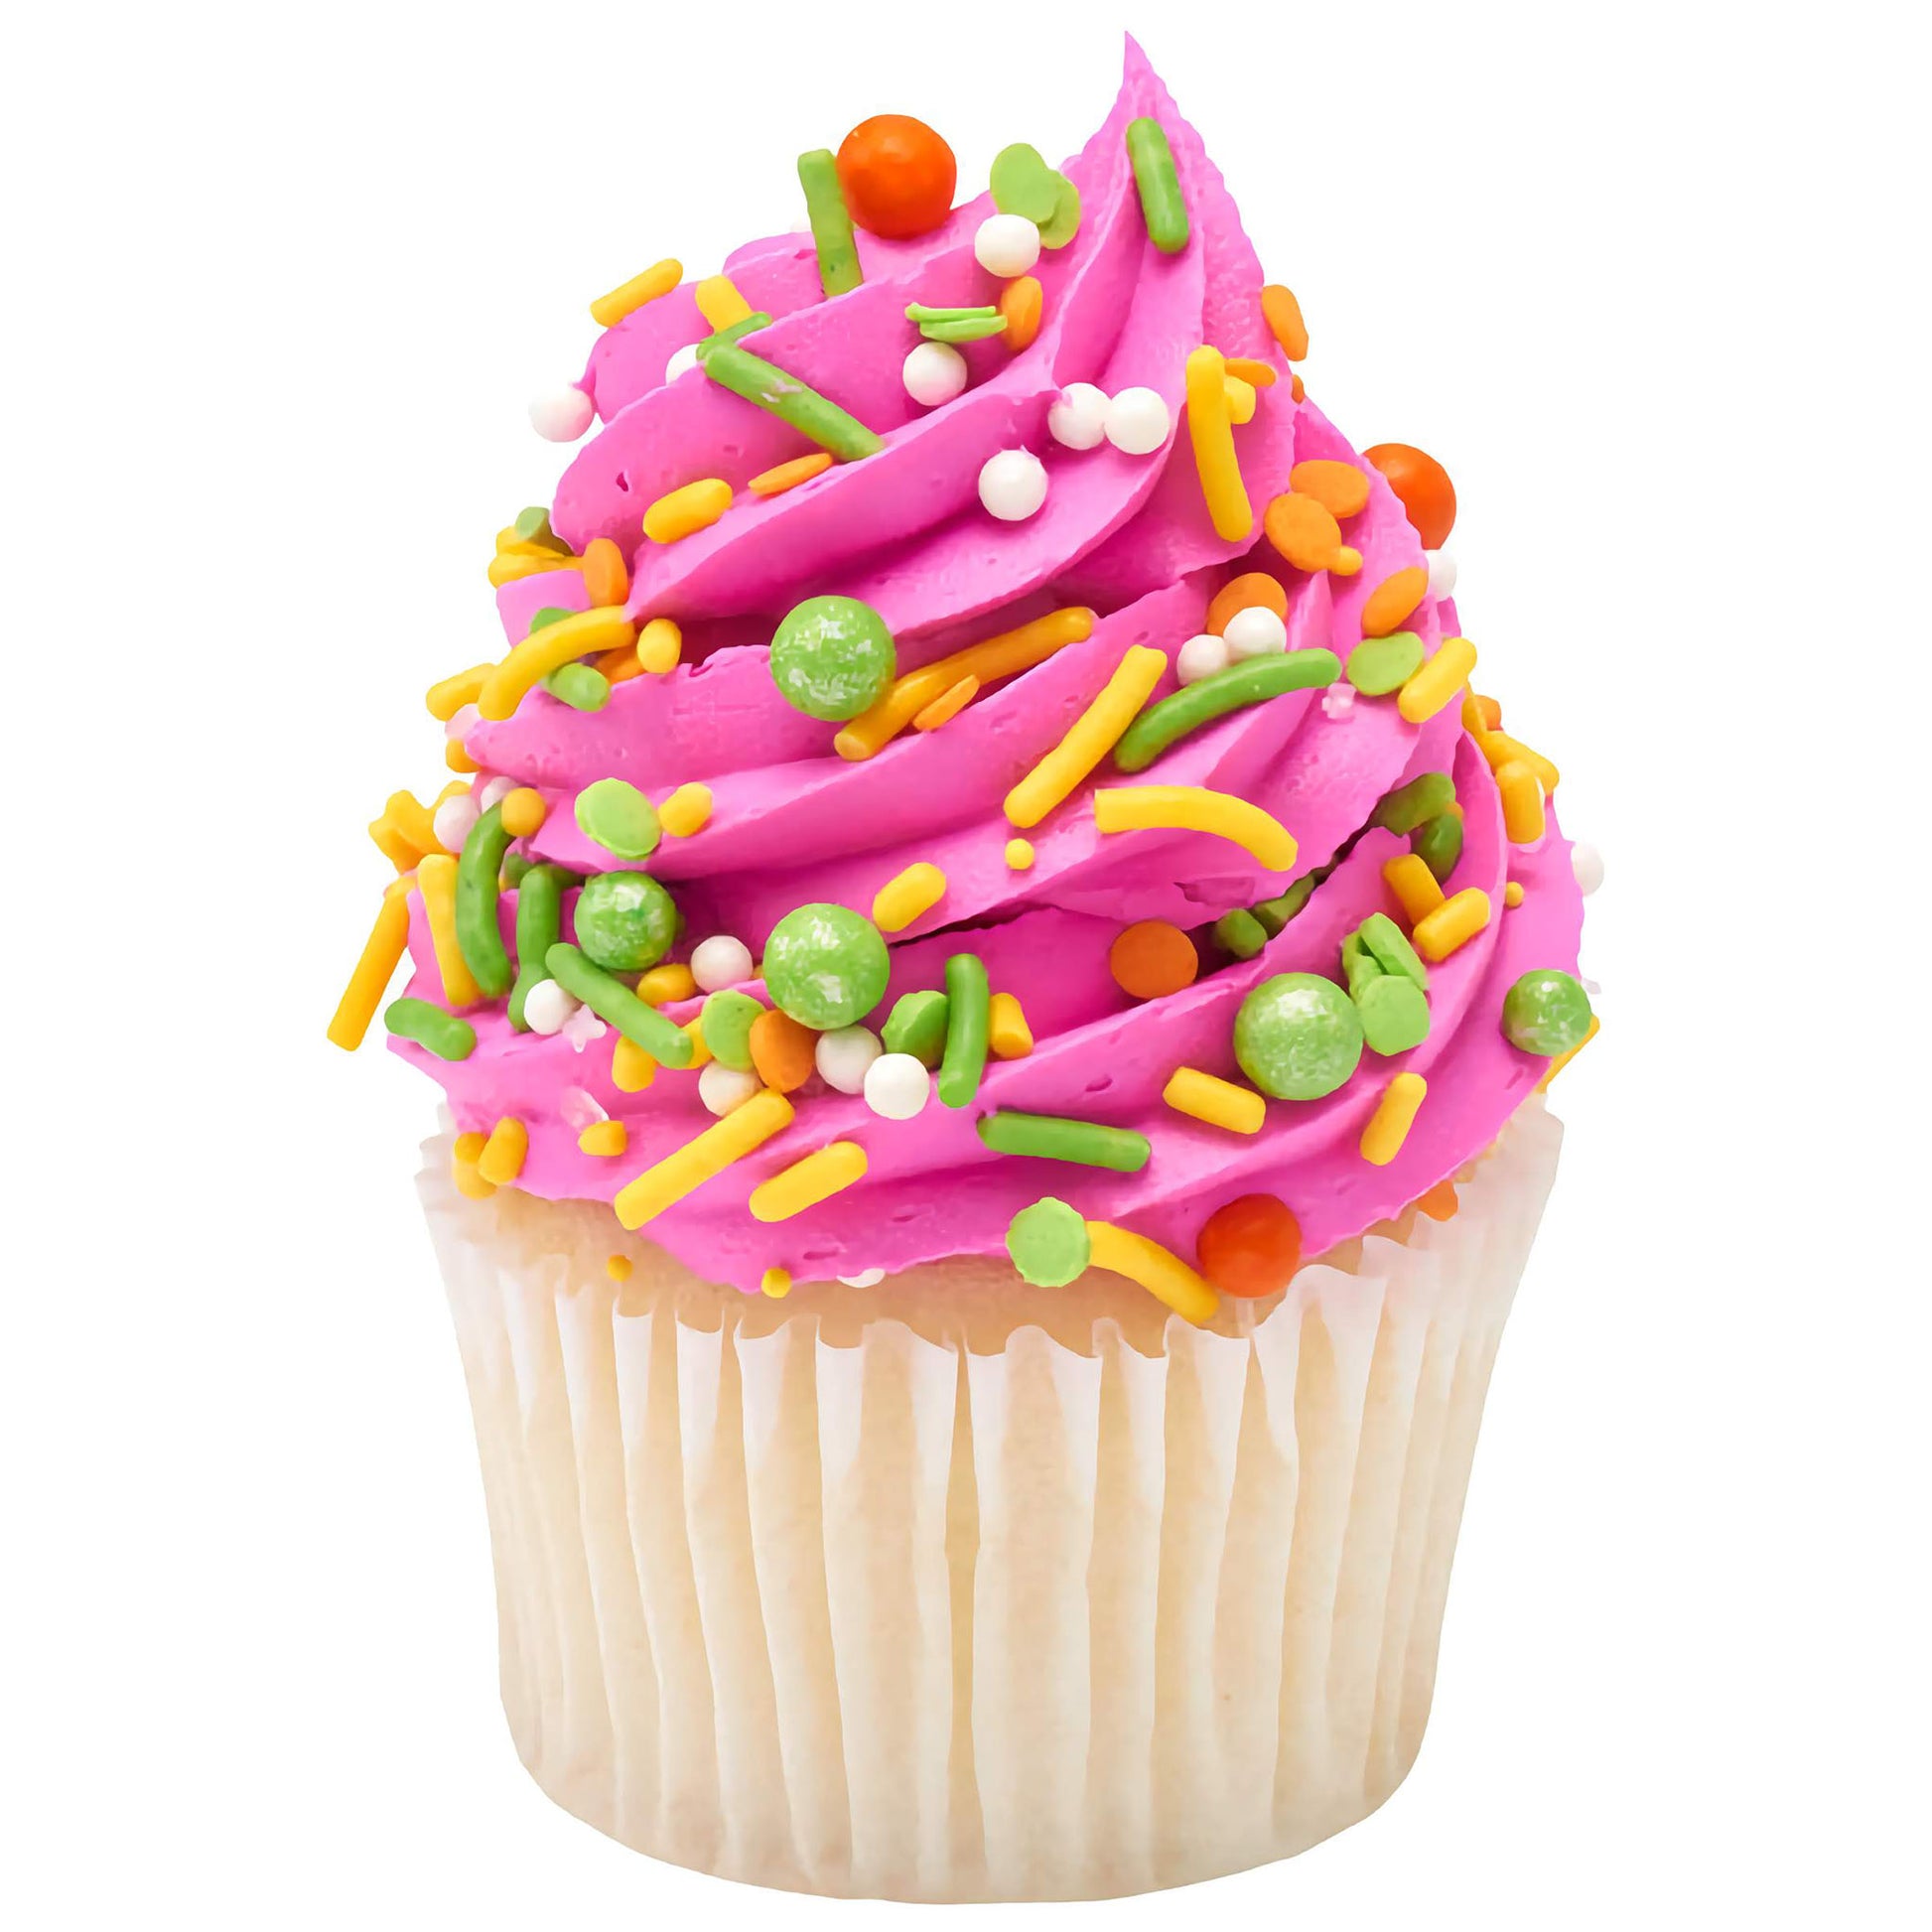 A delicious cupcake topped with bright pink frosting and decorated with the Summer Vibes Deluxe Sprinkle Blend, adding a playful and colorful touch with its variety of shapes and cheerful colors.